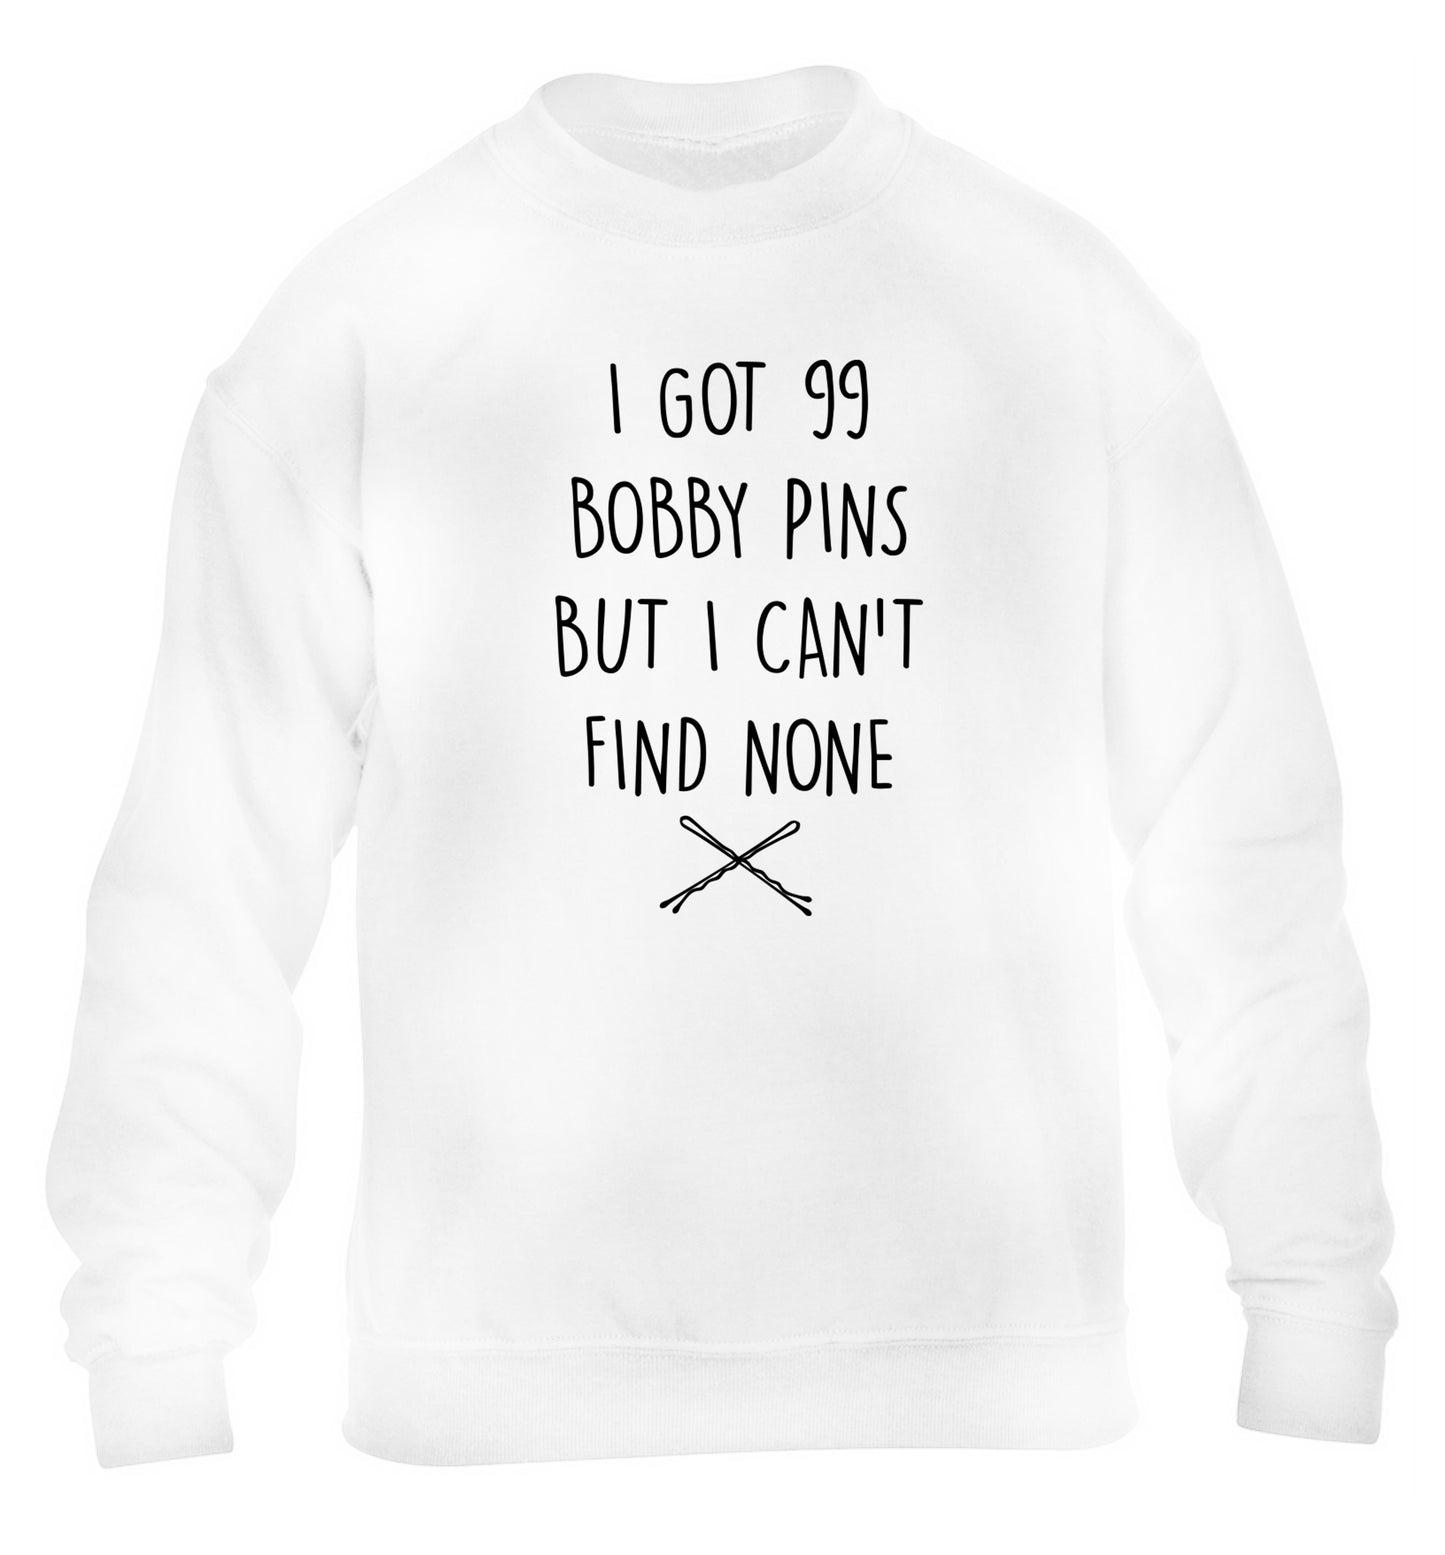 I got 99 bobby pins but I can't find none children's white sweater 12-14 Years